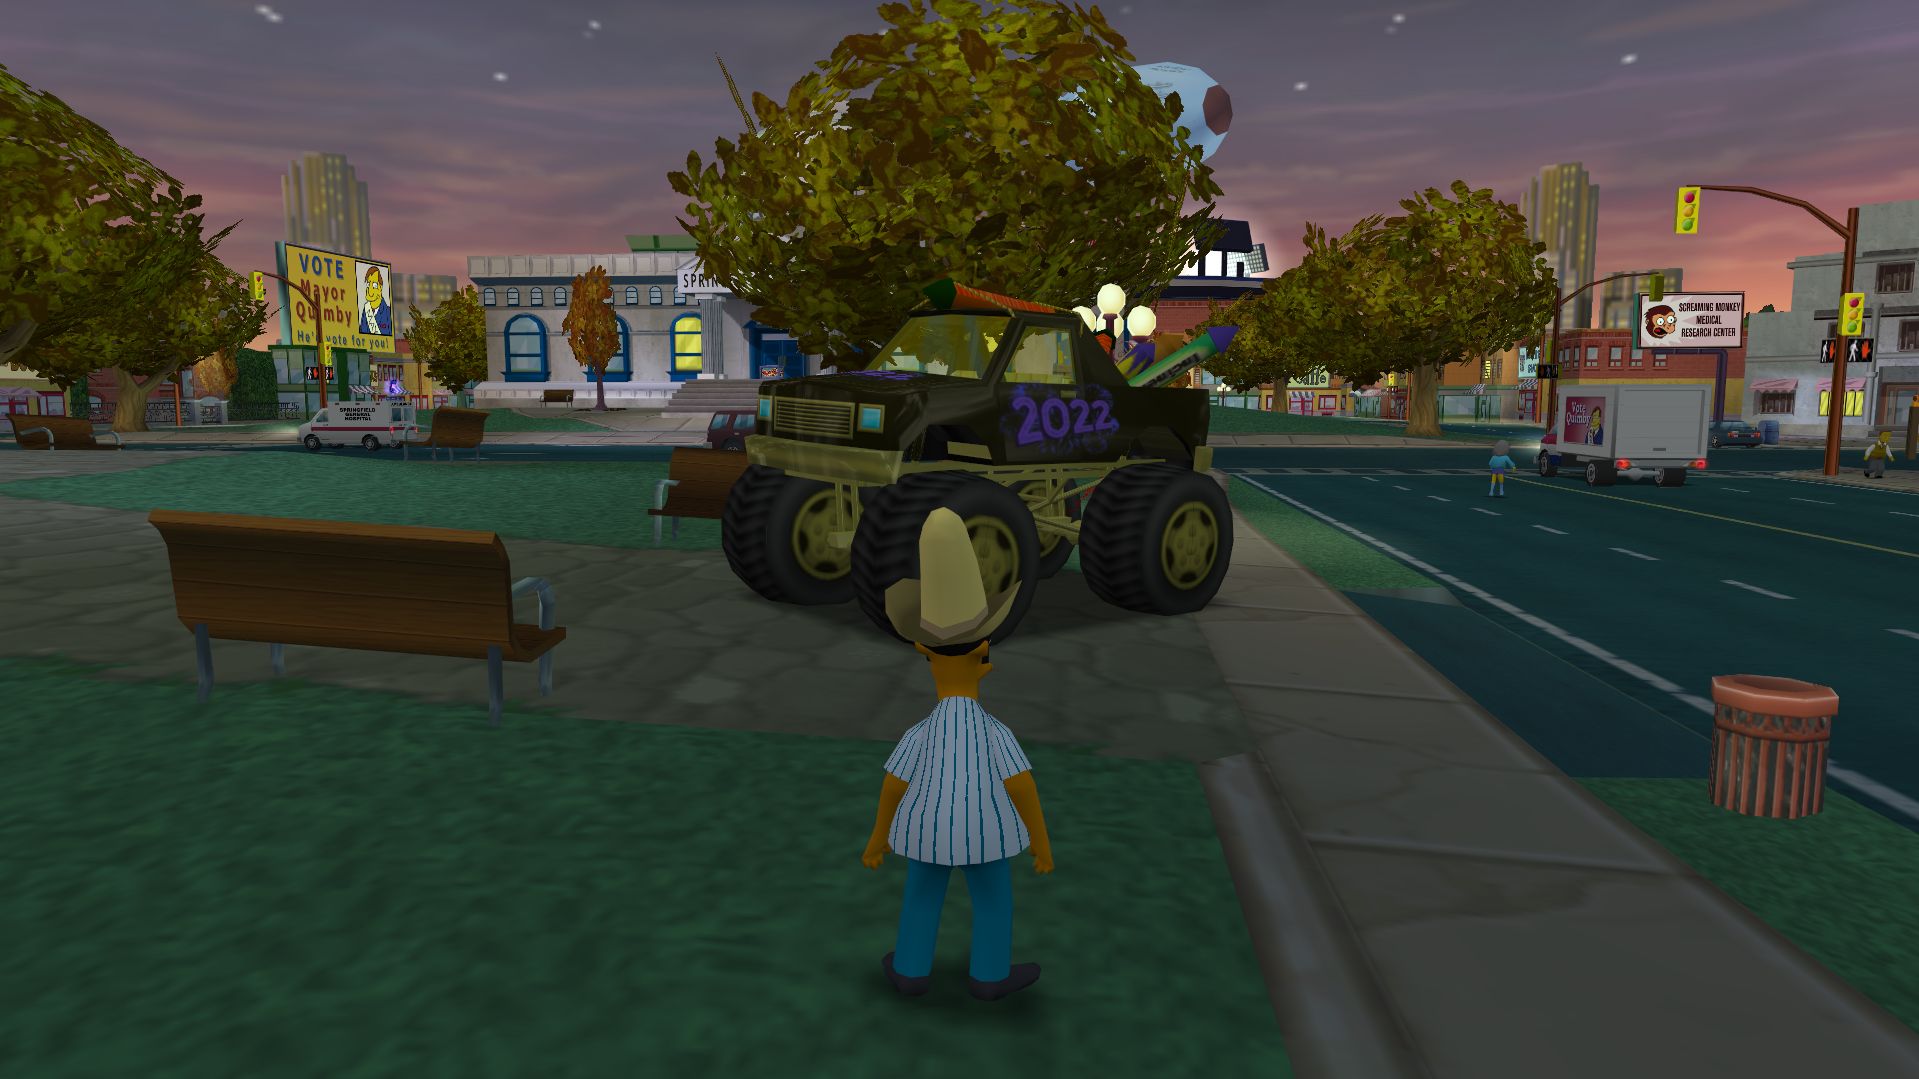 Apu standing in front of the New Years 2022 Monster Truck.